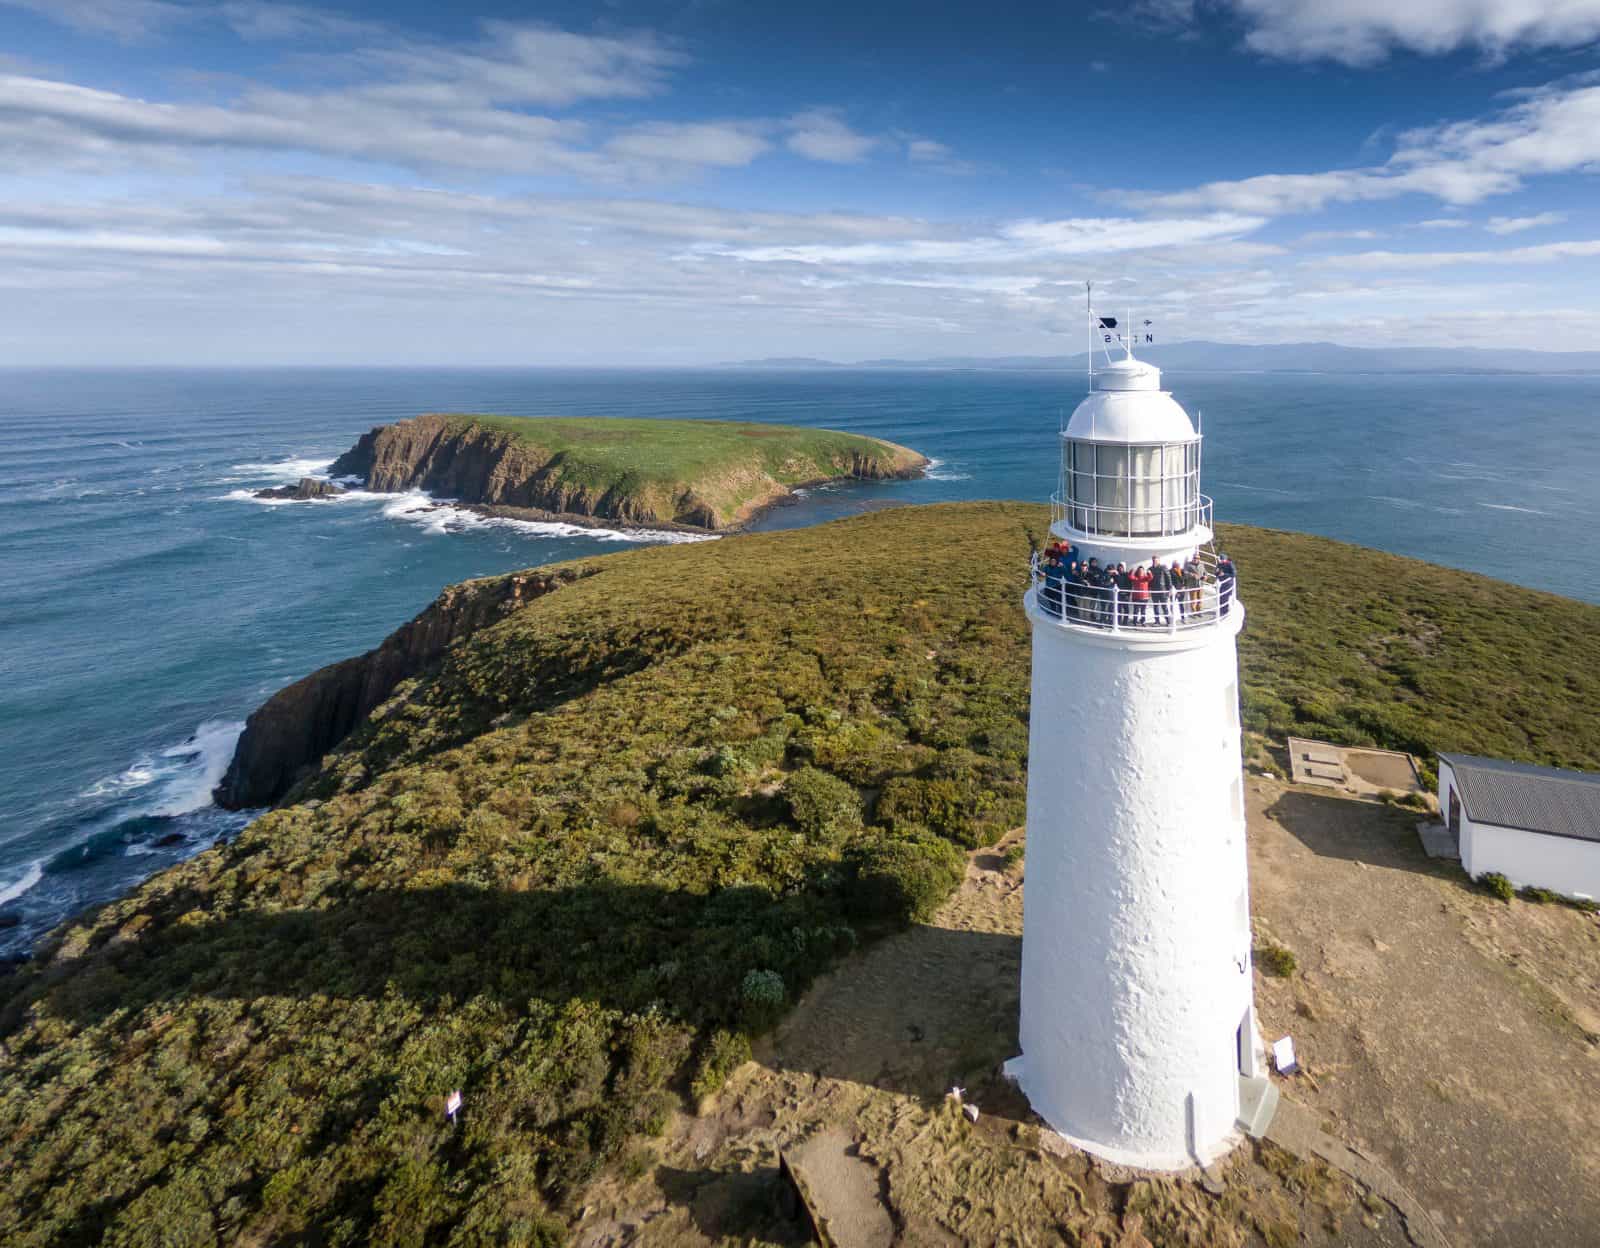 Join our Bruny Island Food, Sightseeing and Lighthouse Tour. Your lighthouse tour is included.